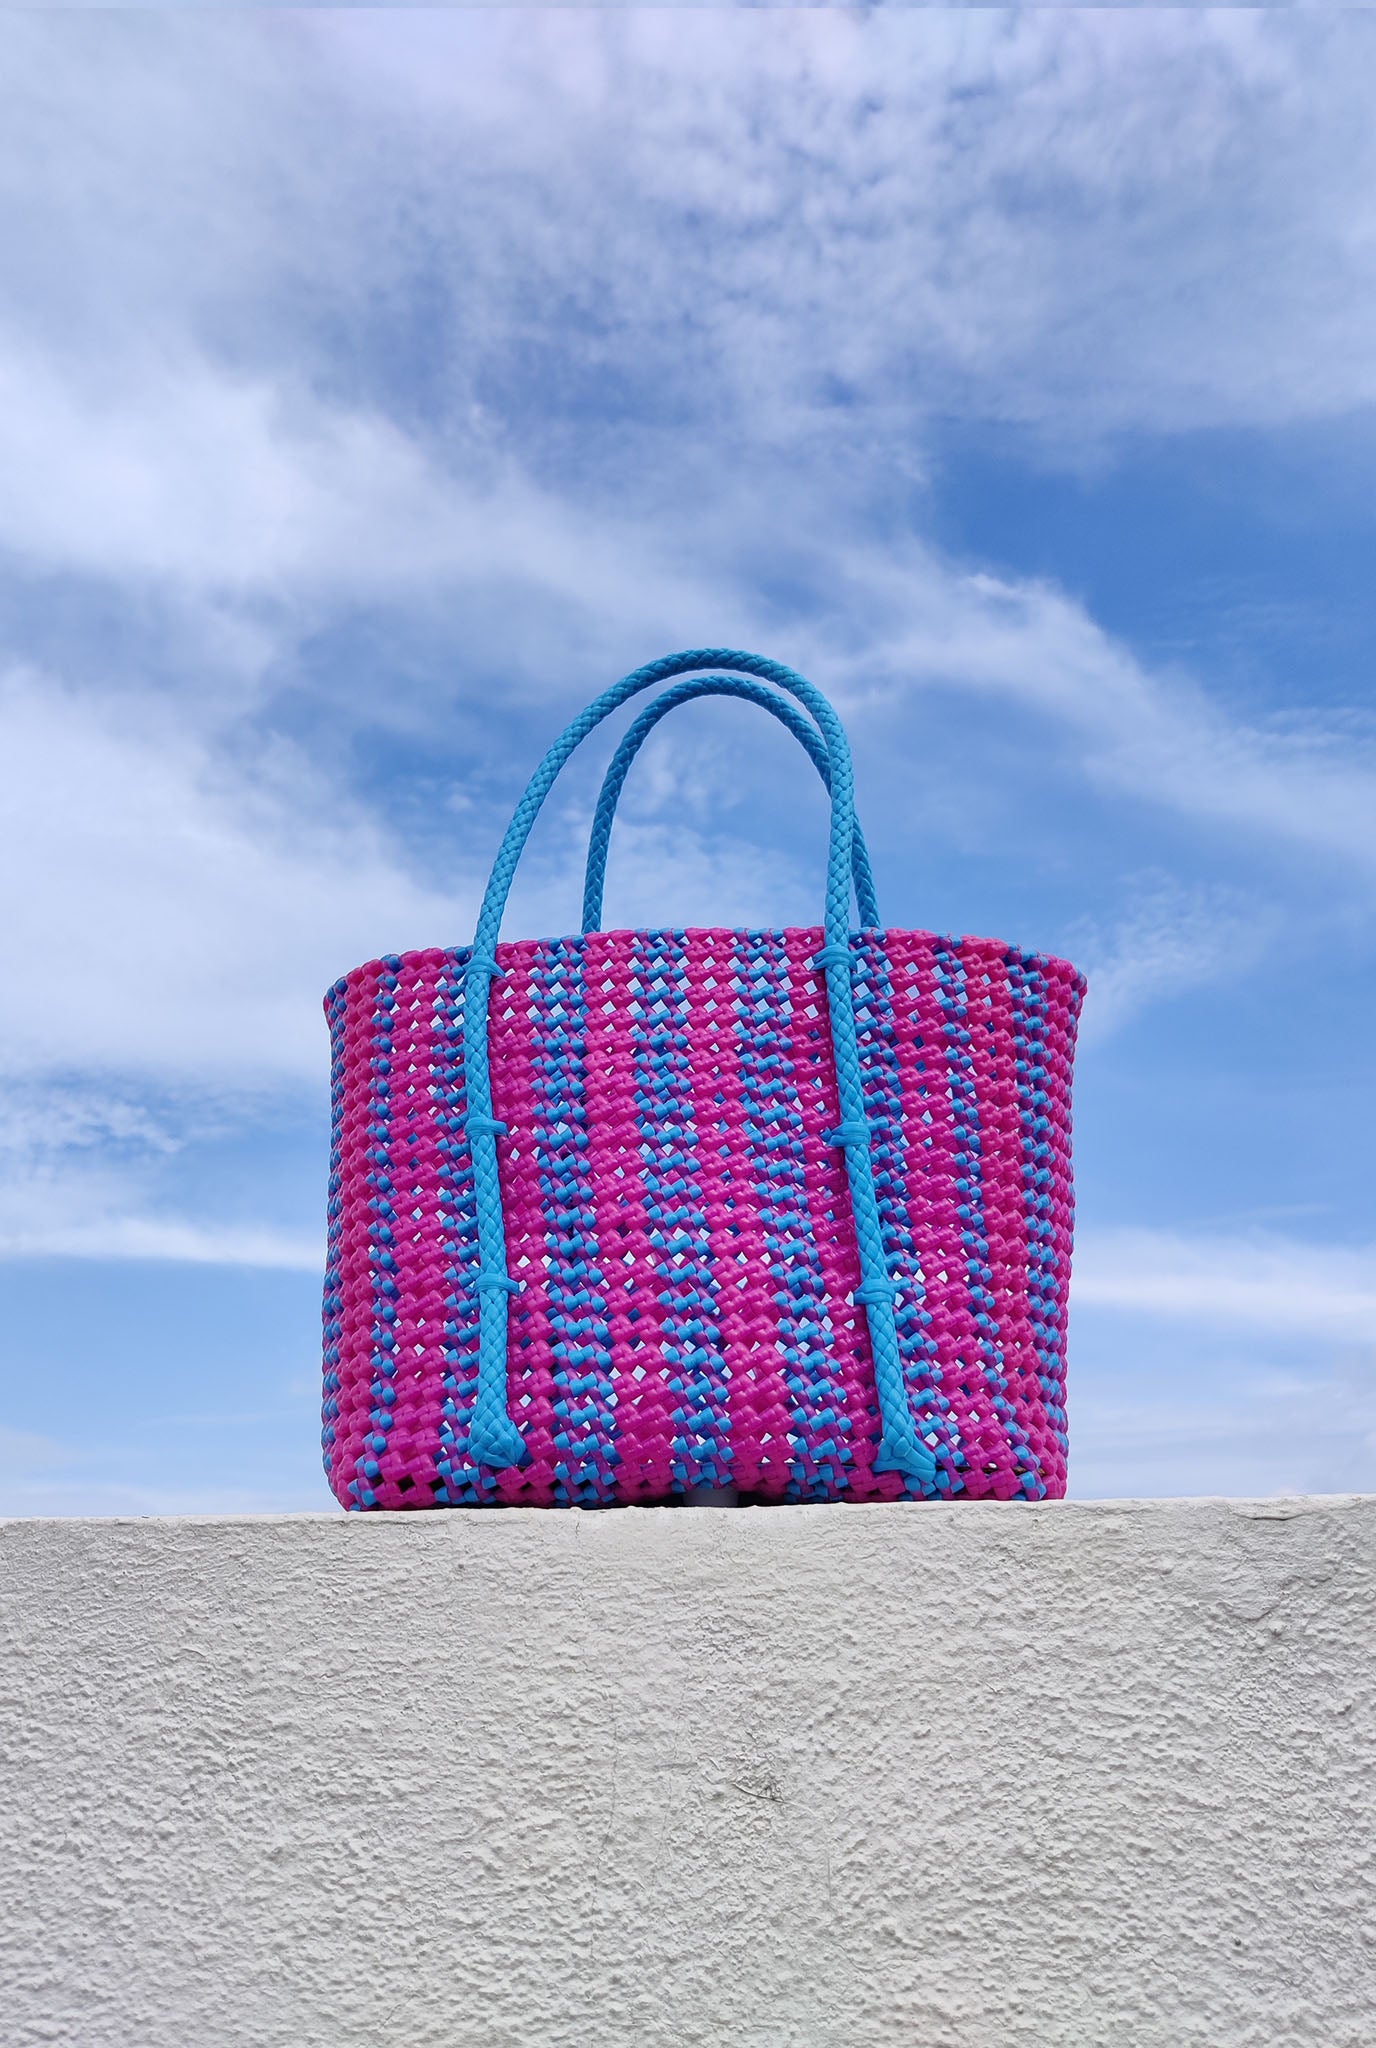 The Future of PP Woven Bags: Trends and Innovations